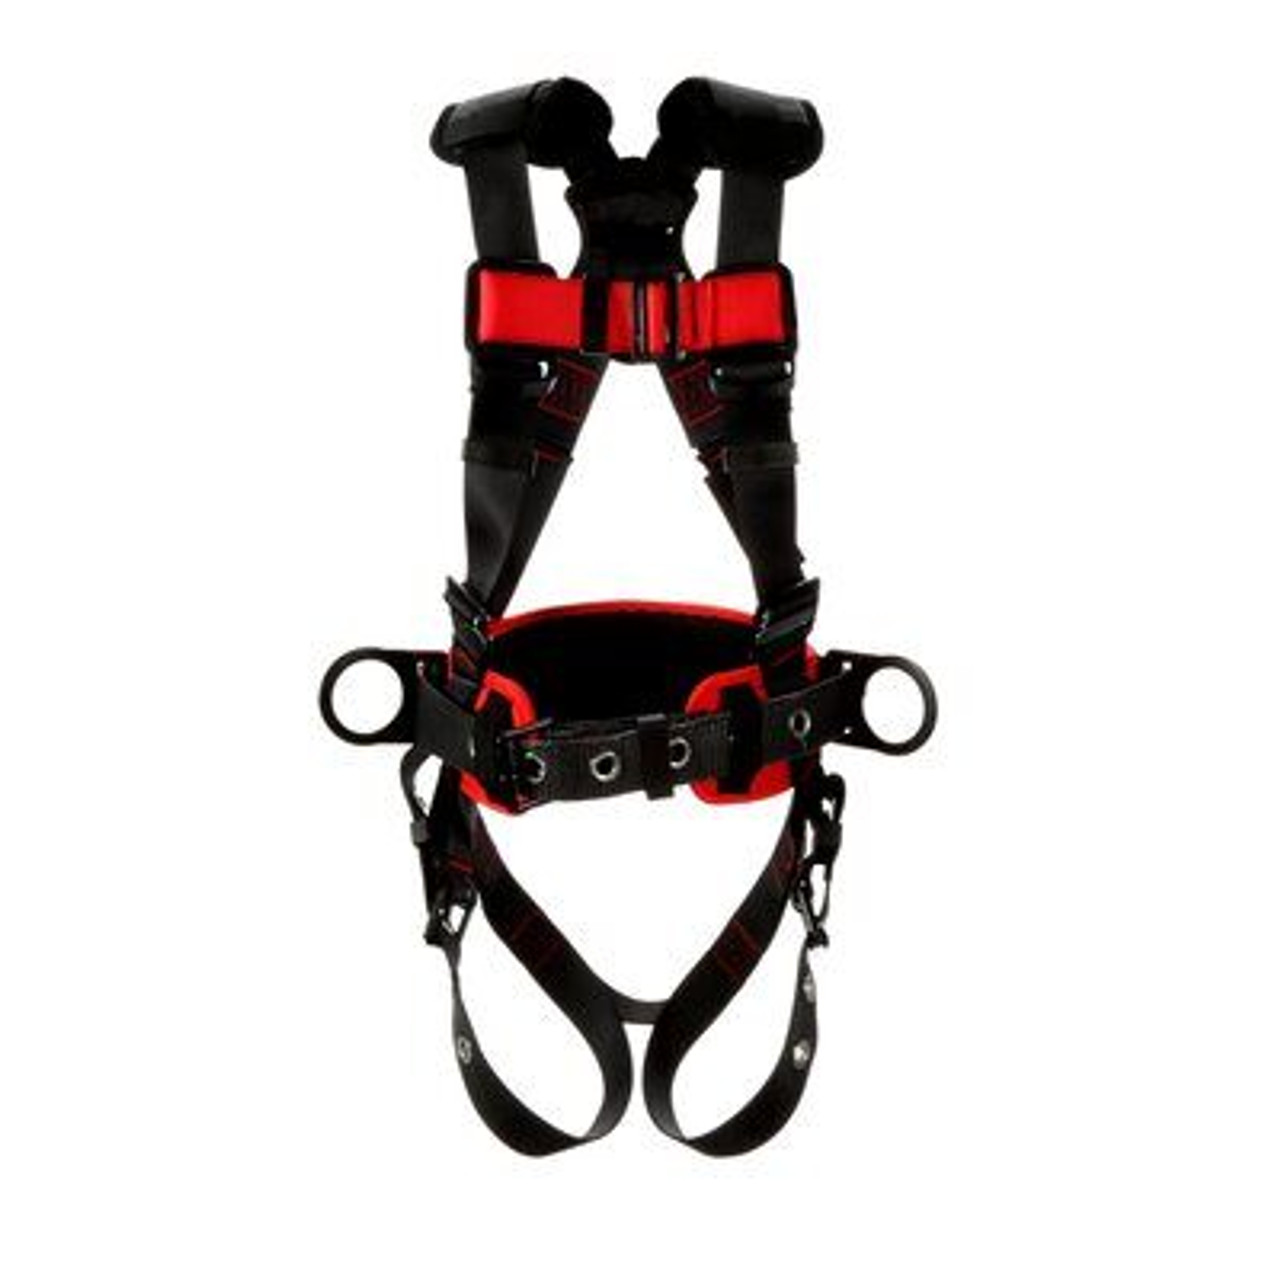 3M™ Protecta® Construction Style Positioning Harness